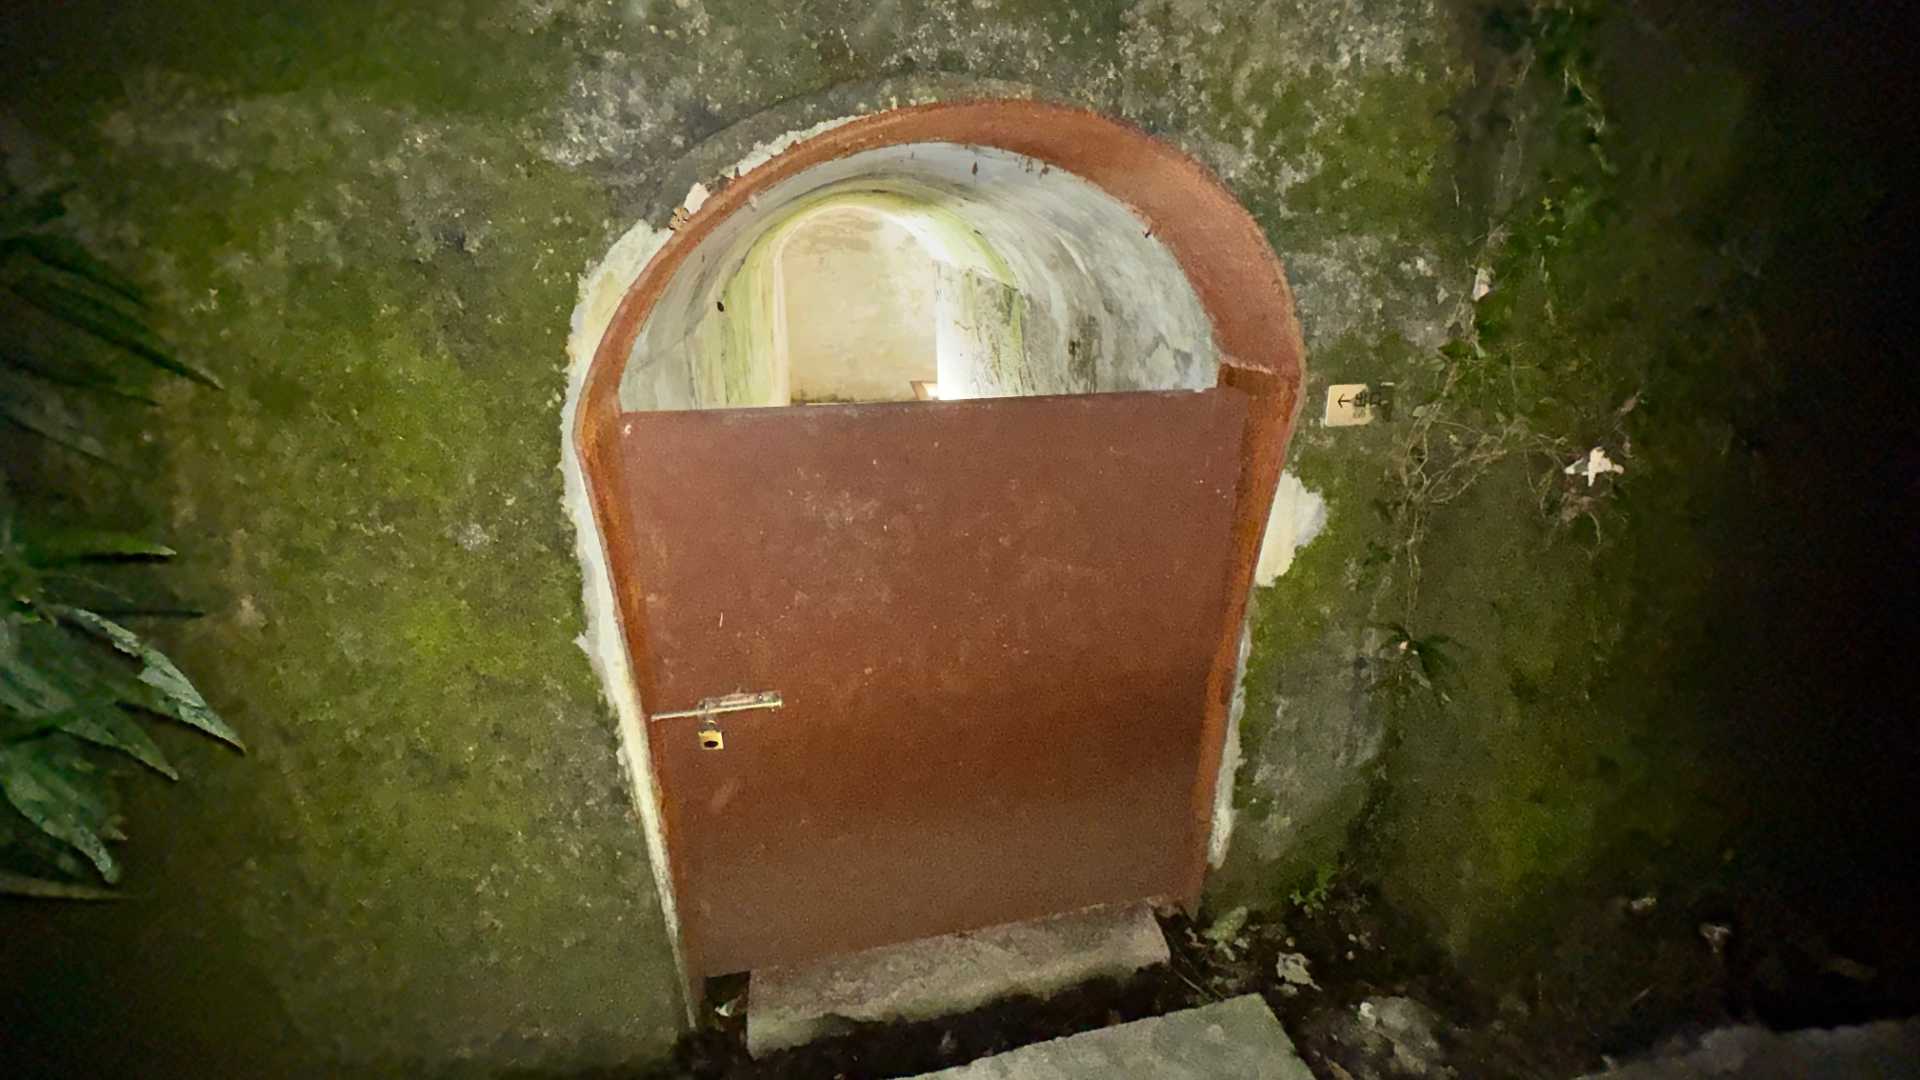 An arched entrance to a bomb shelter. A rusted metal door is locked, but the interior of the shelter can be seen over the top of the door. The walls are covered in green moss.